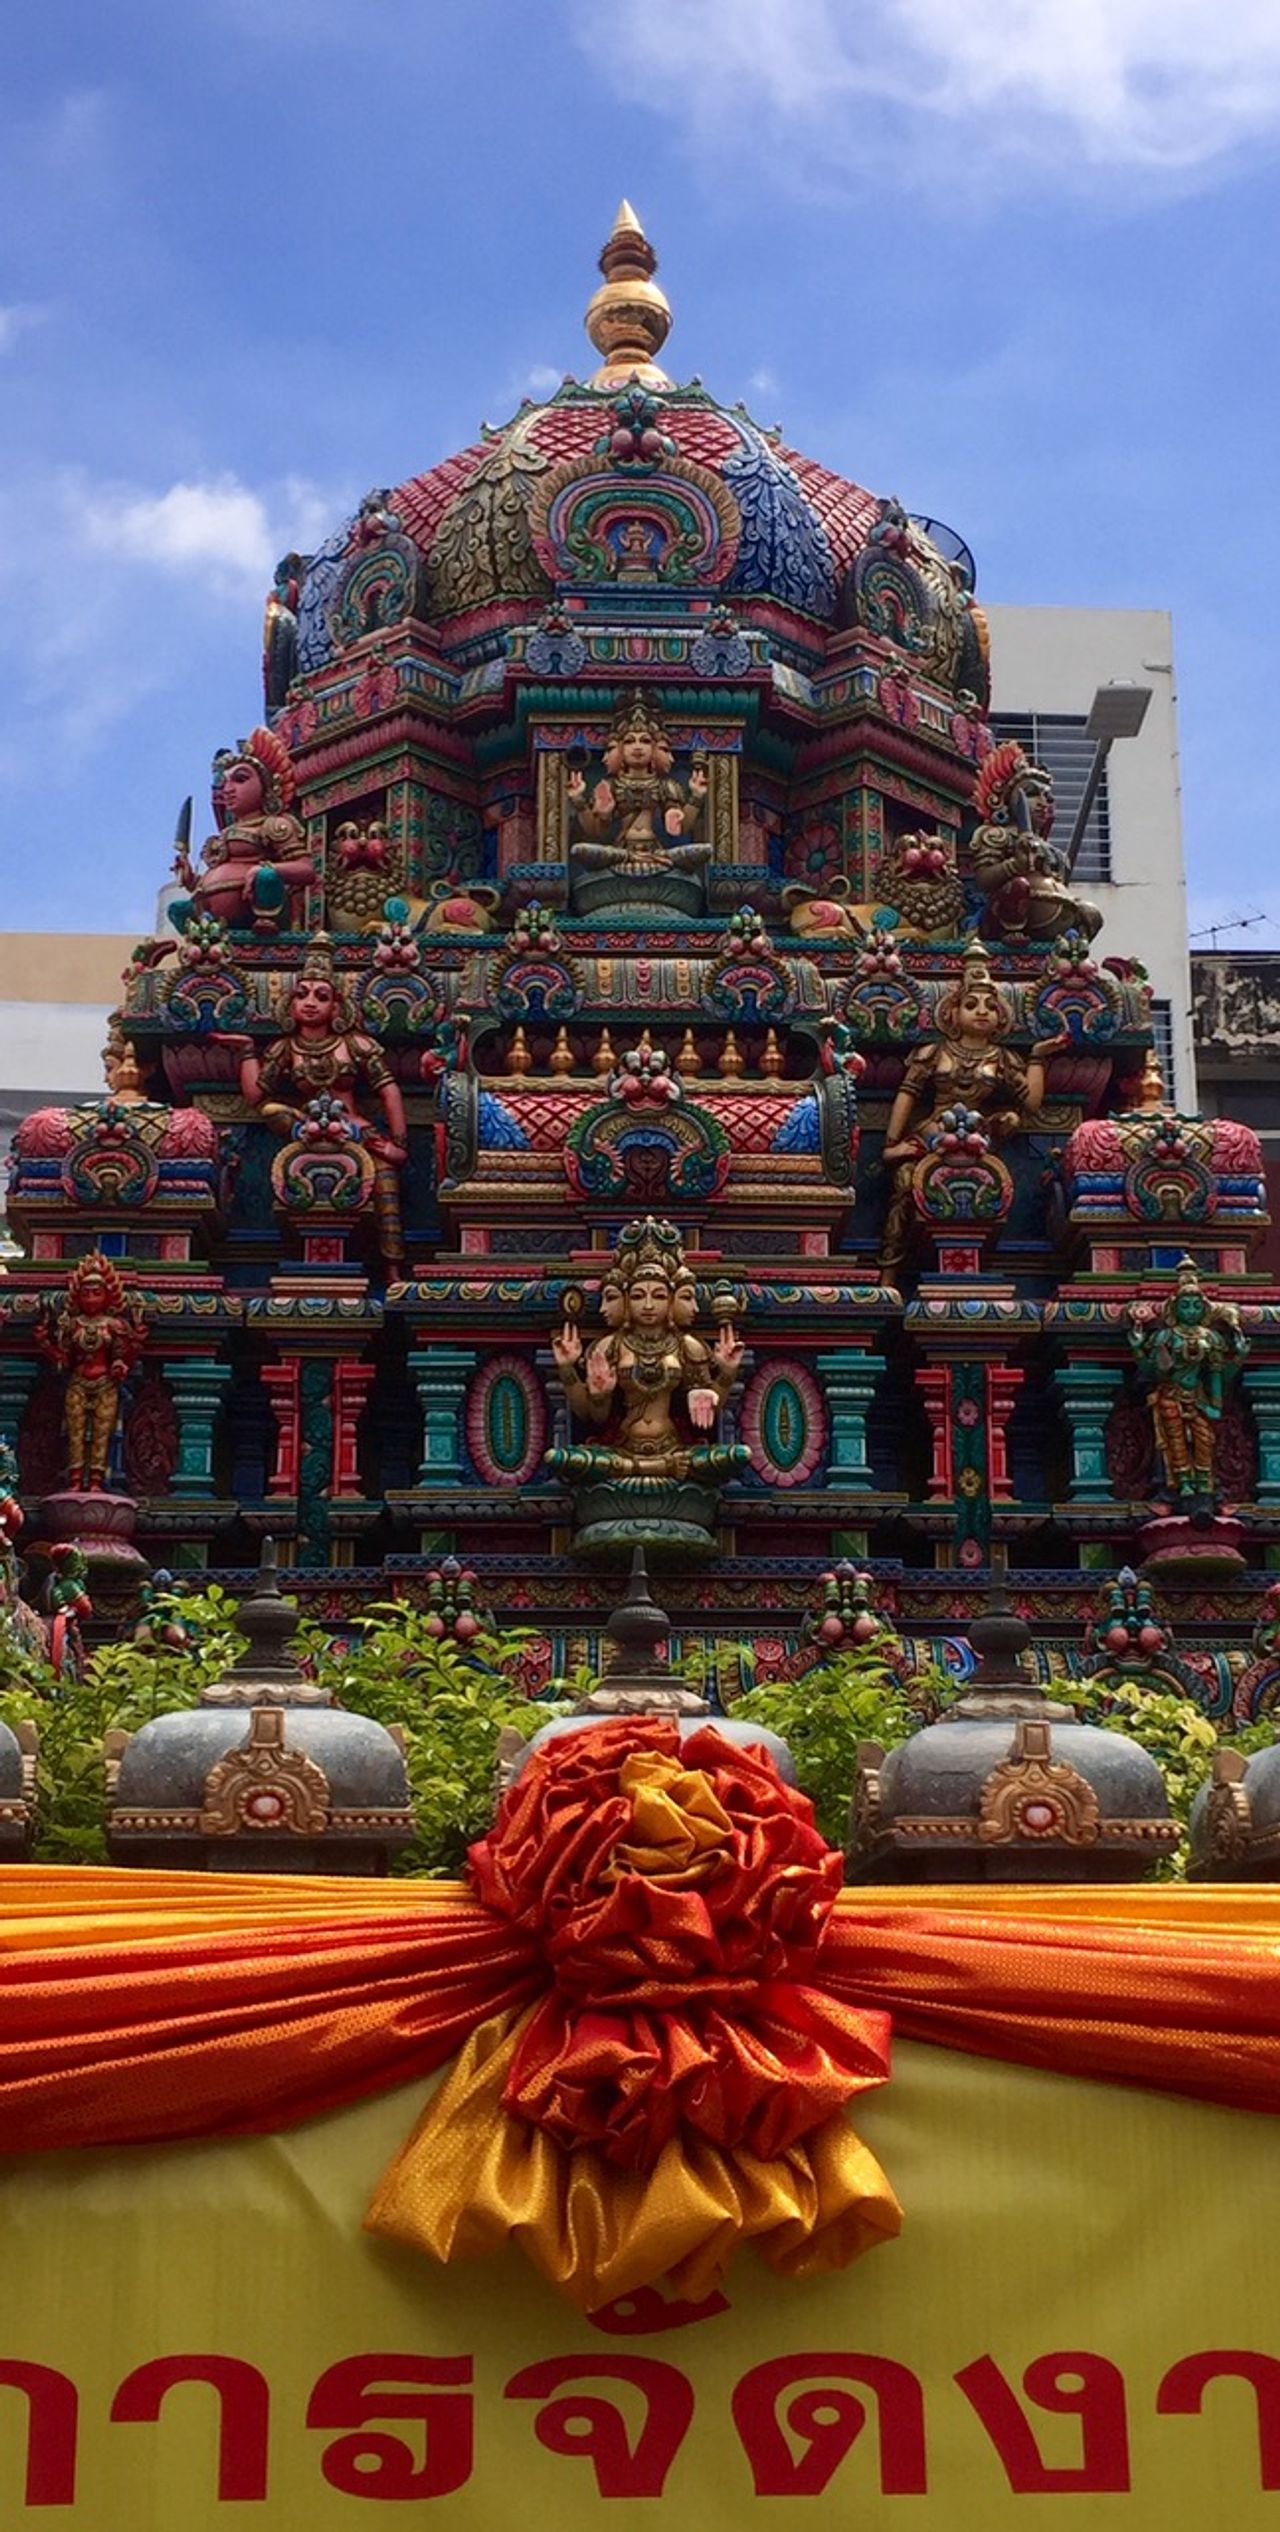 A colorful Hindu temple.